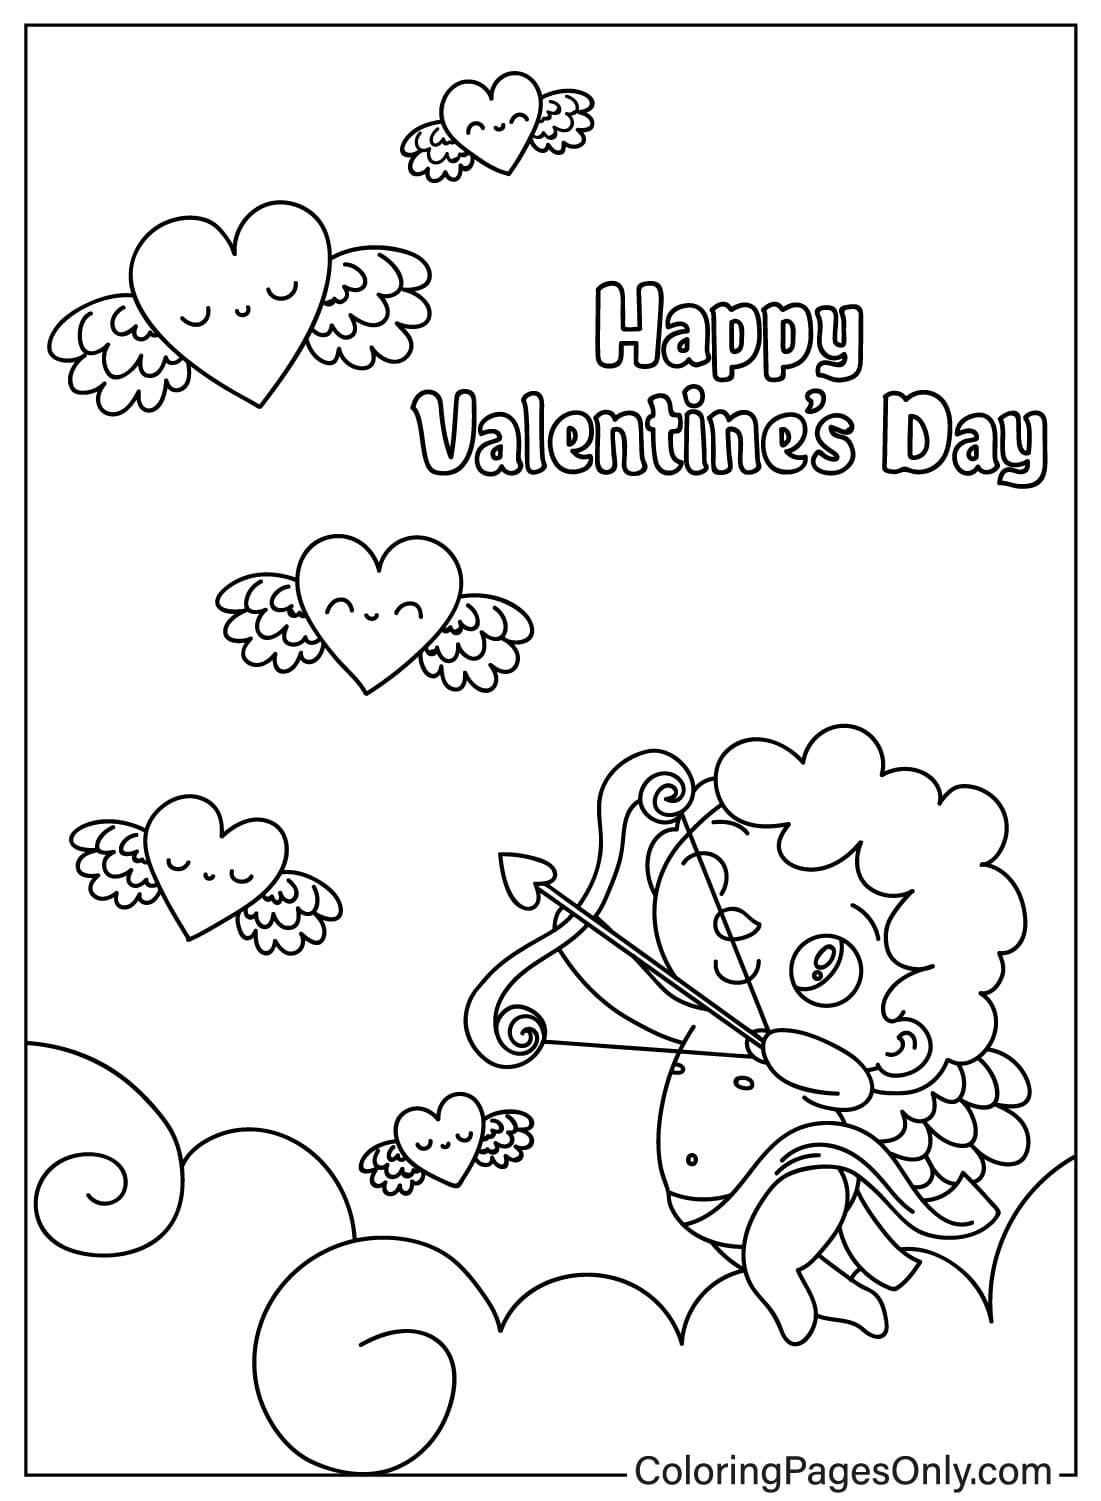 Valentine’s Day Cupid Coloring Page